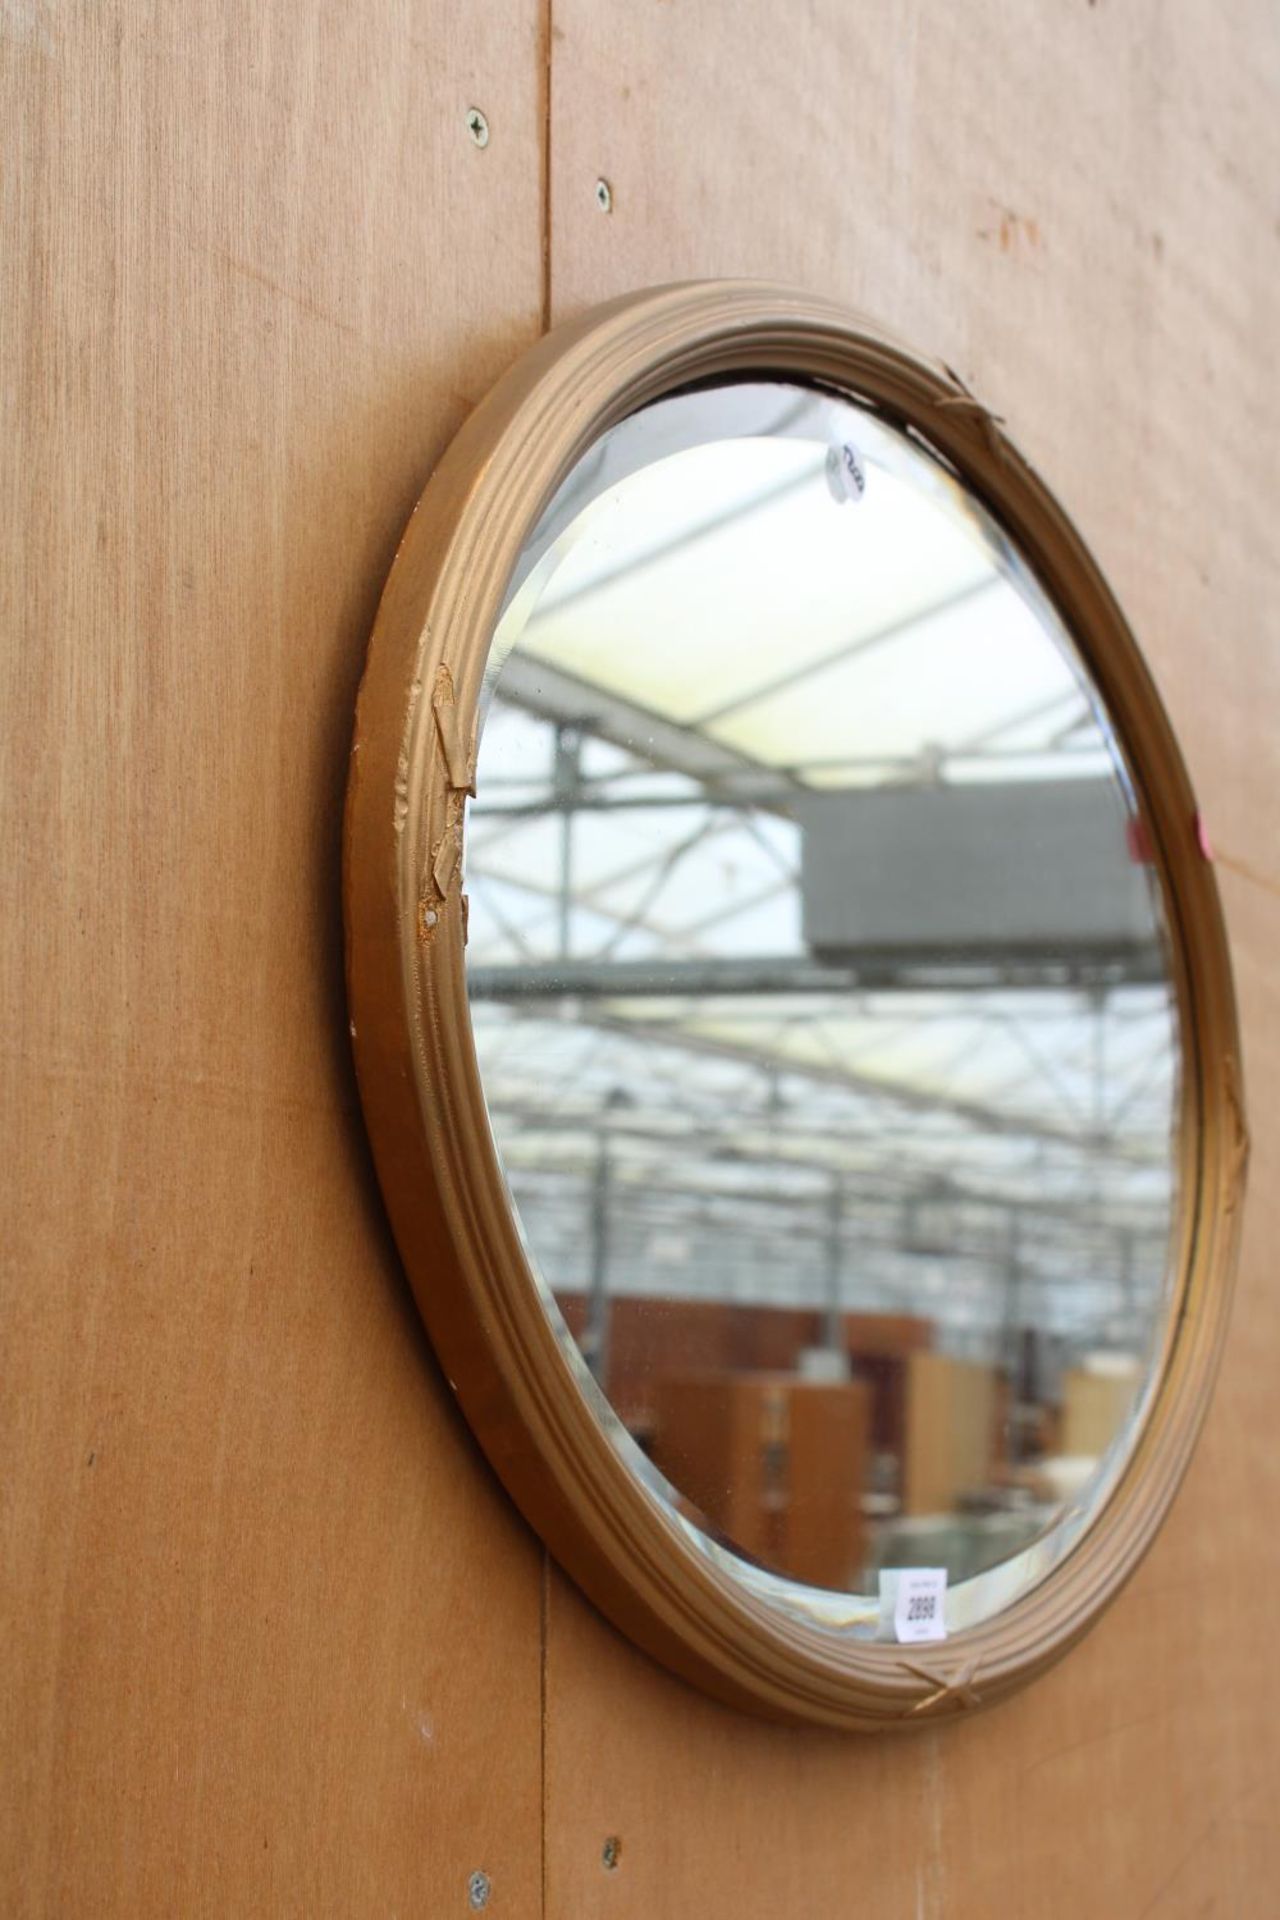 A MODERN OVAL BEVEL EDGE WALL MIRROR, 25" X 17" - Image 2 of 2